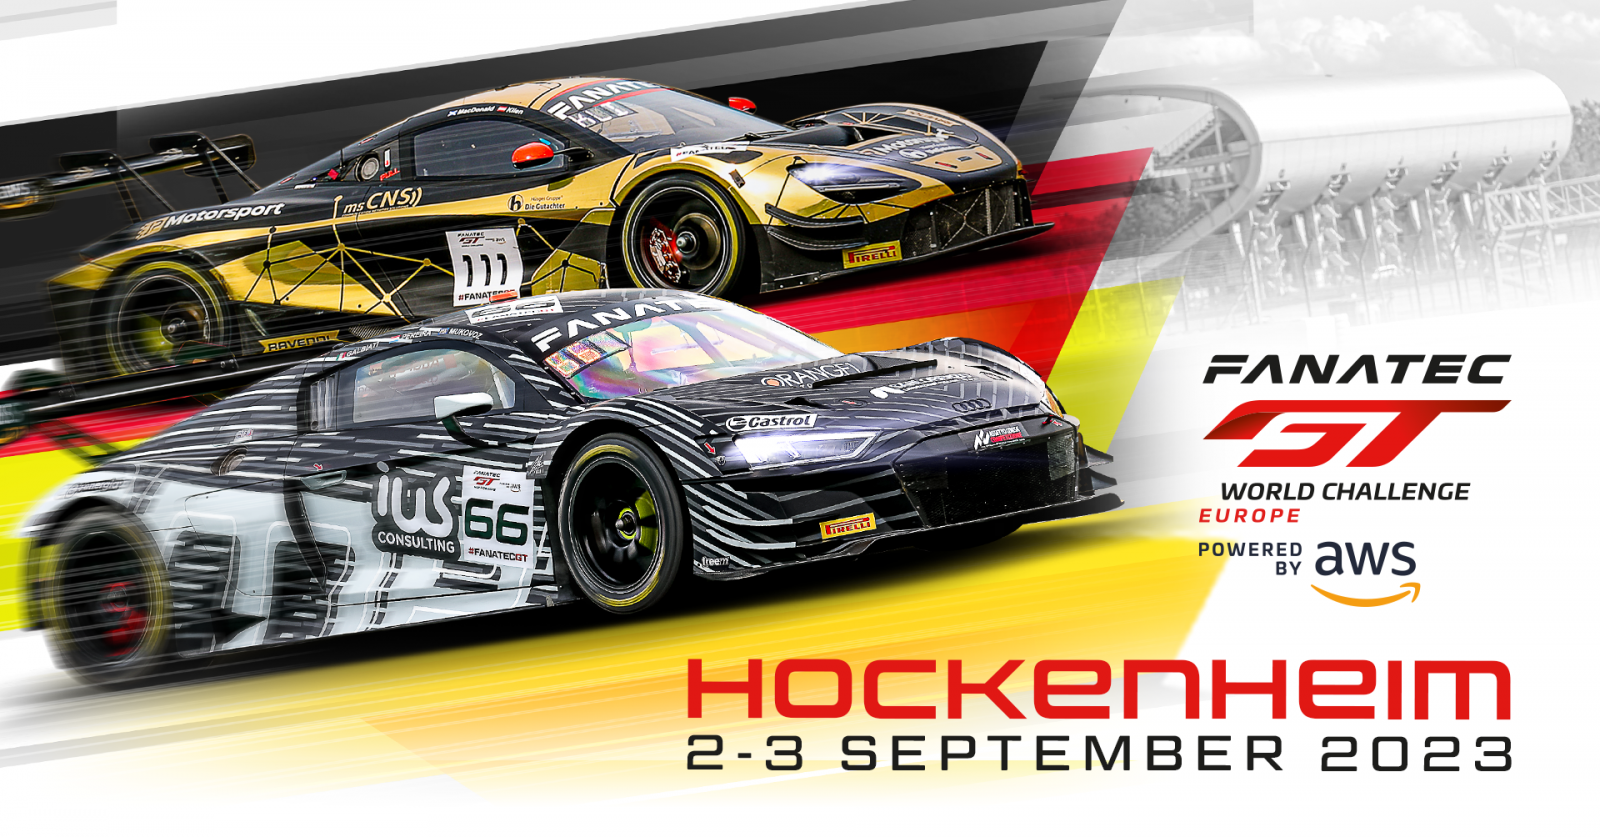 Fanatec GT Europe set for action-packed return to Hockenheim with stacked 41-car grid